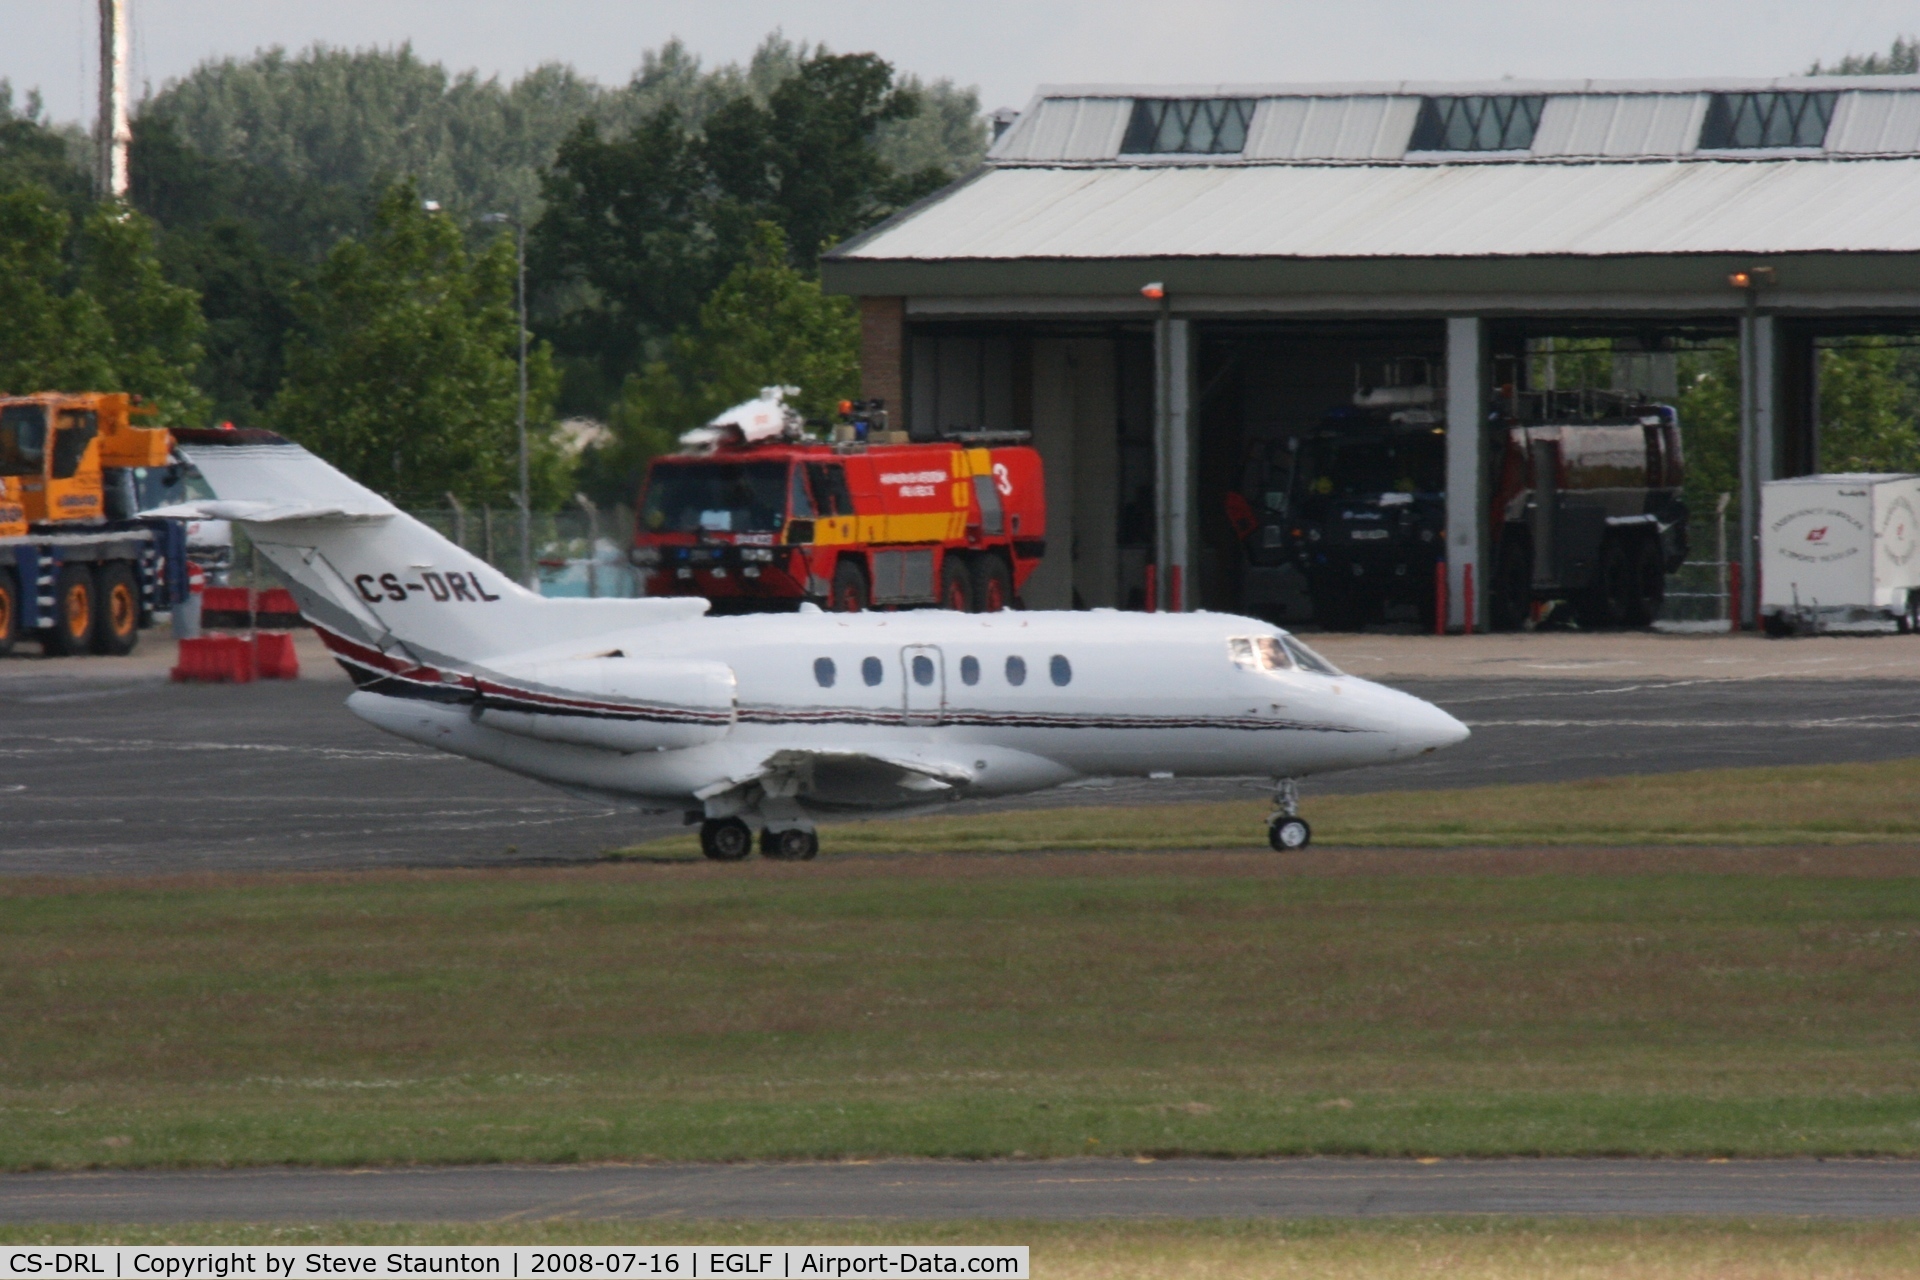 CS-DRL, 2006 Raytheon Hawker 800XP C/N 258770, Taken at Farnborough Airshow on the Wednesday trade day, 16th July 2009